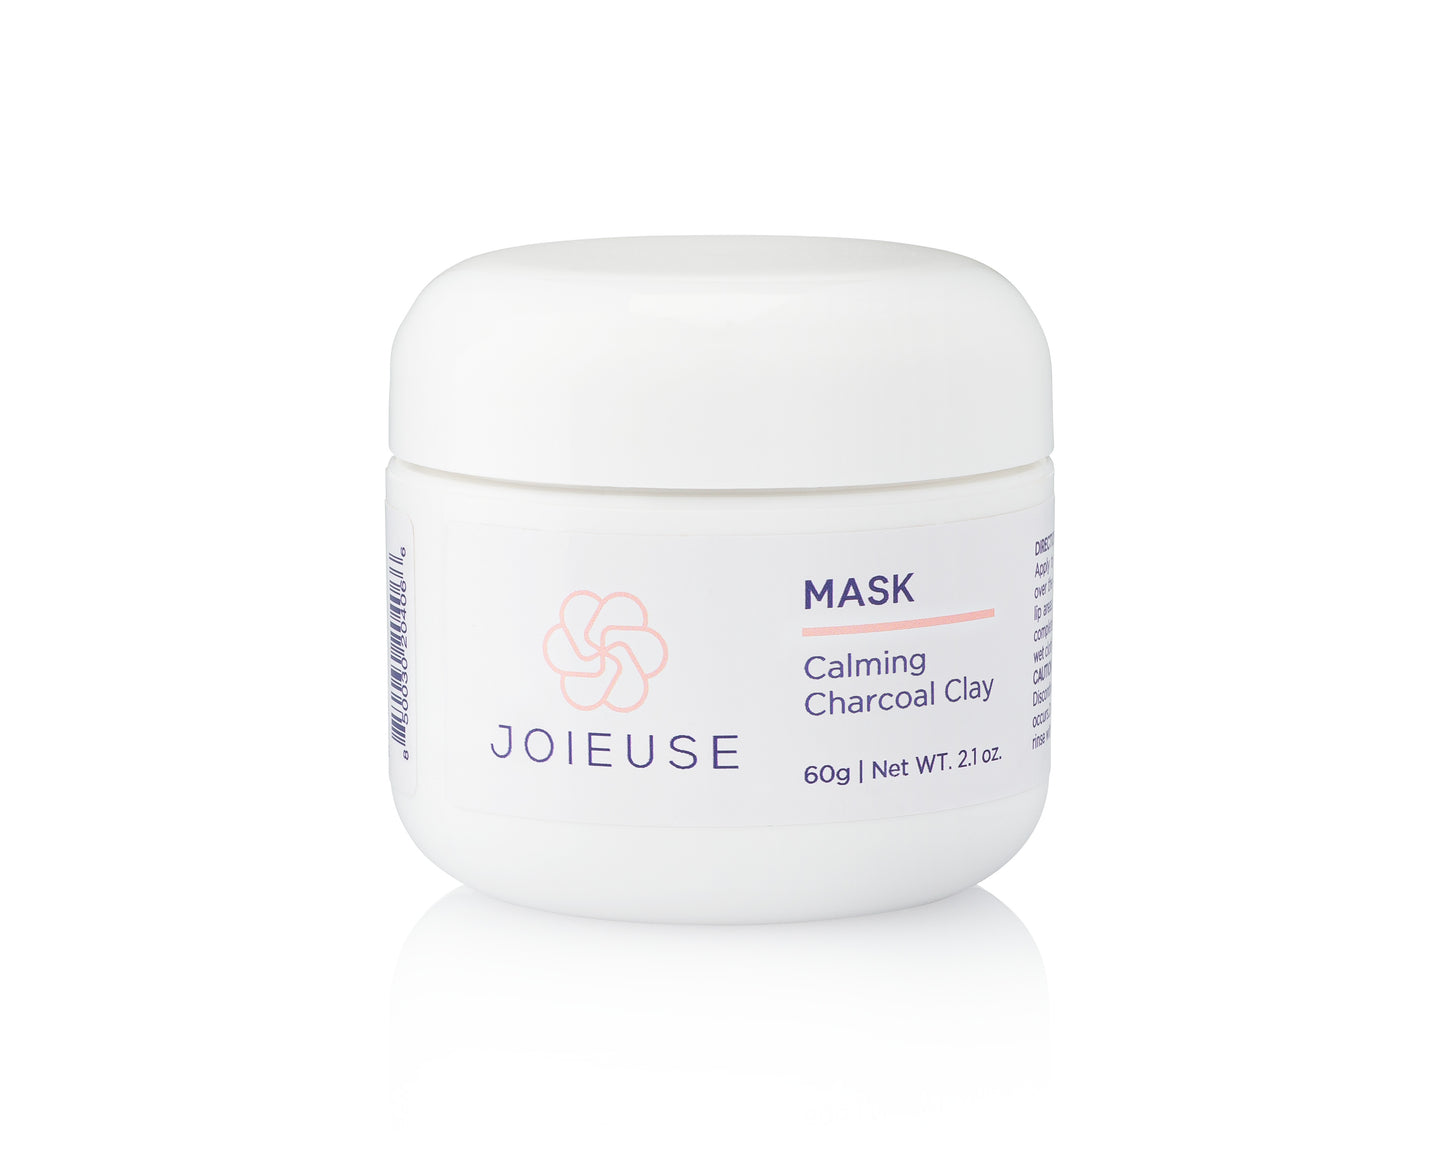 Joieuse Calming Charcoal Clay Mask